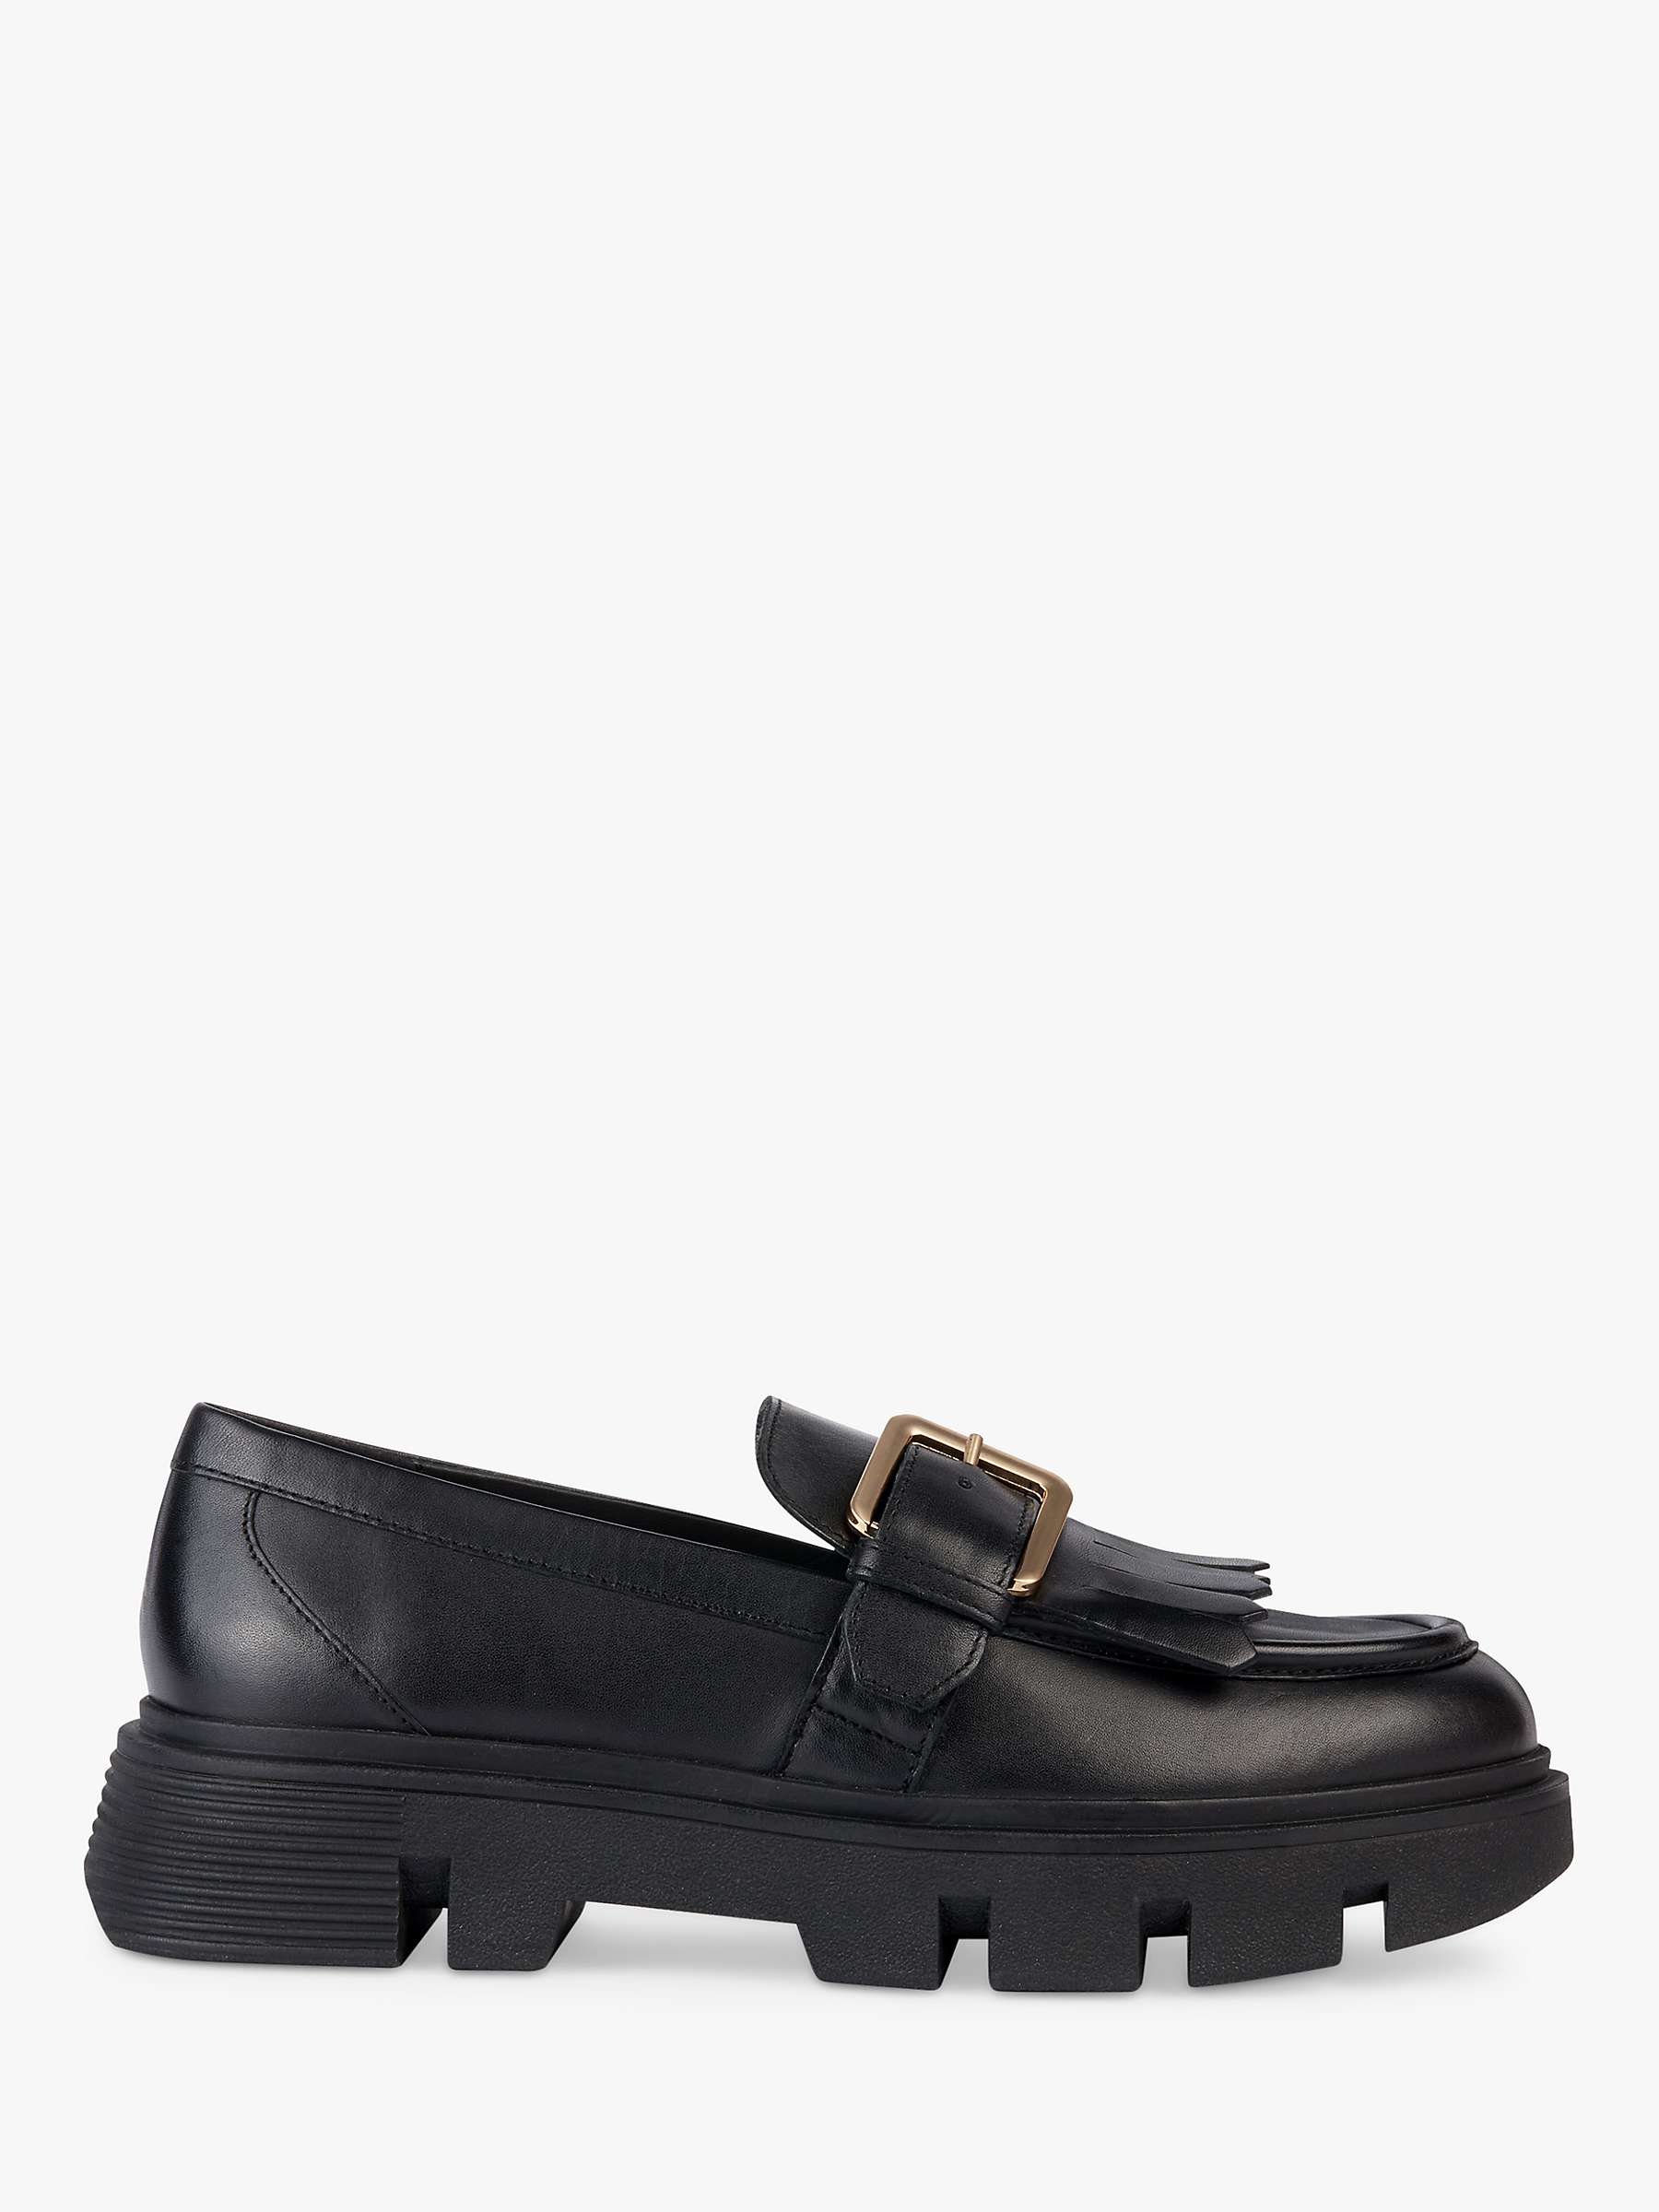 Geox Wide Fit Vilde Chunky Loafers, Black at John Lewis & Partners